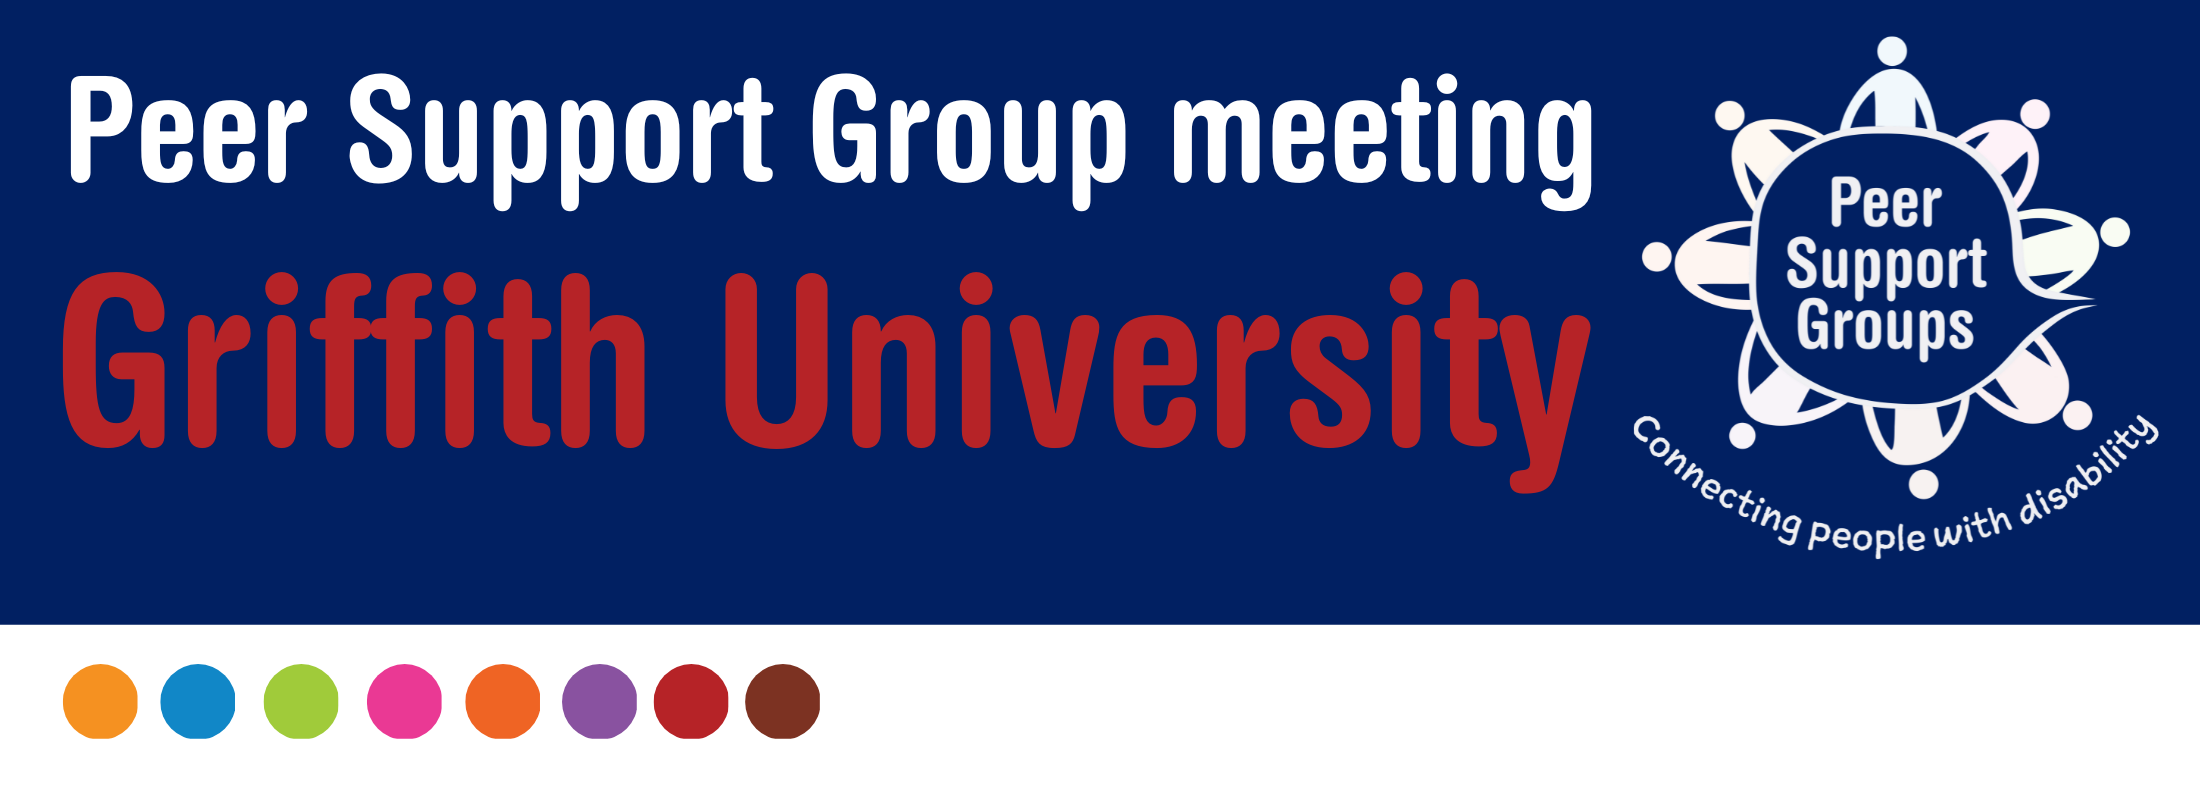 Dark blue back ground with a text saying Peer Support Group meeting - Griffith University